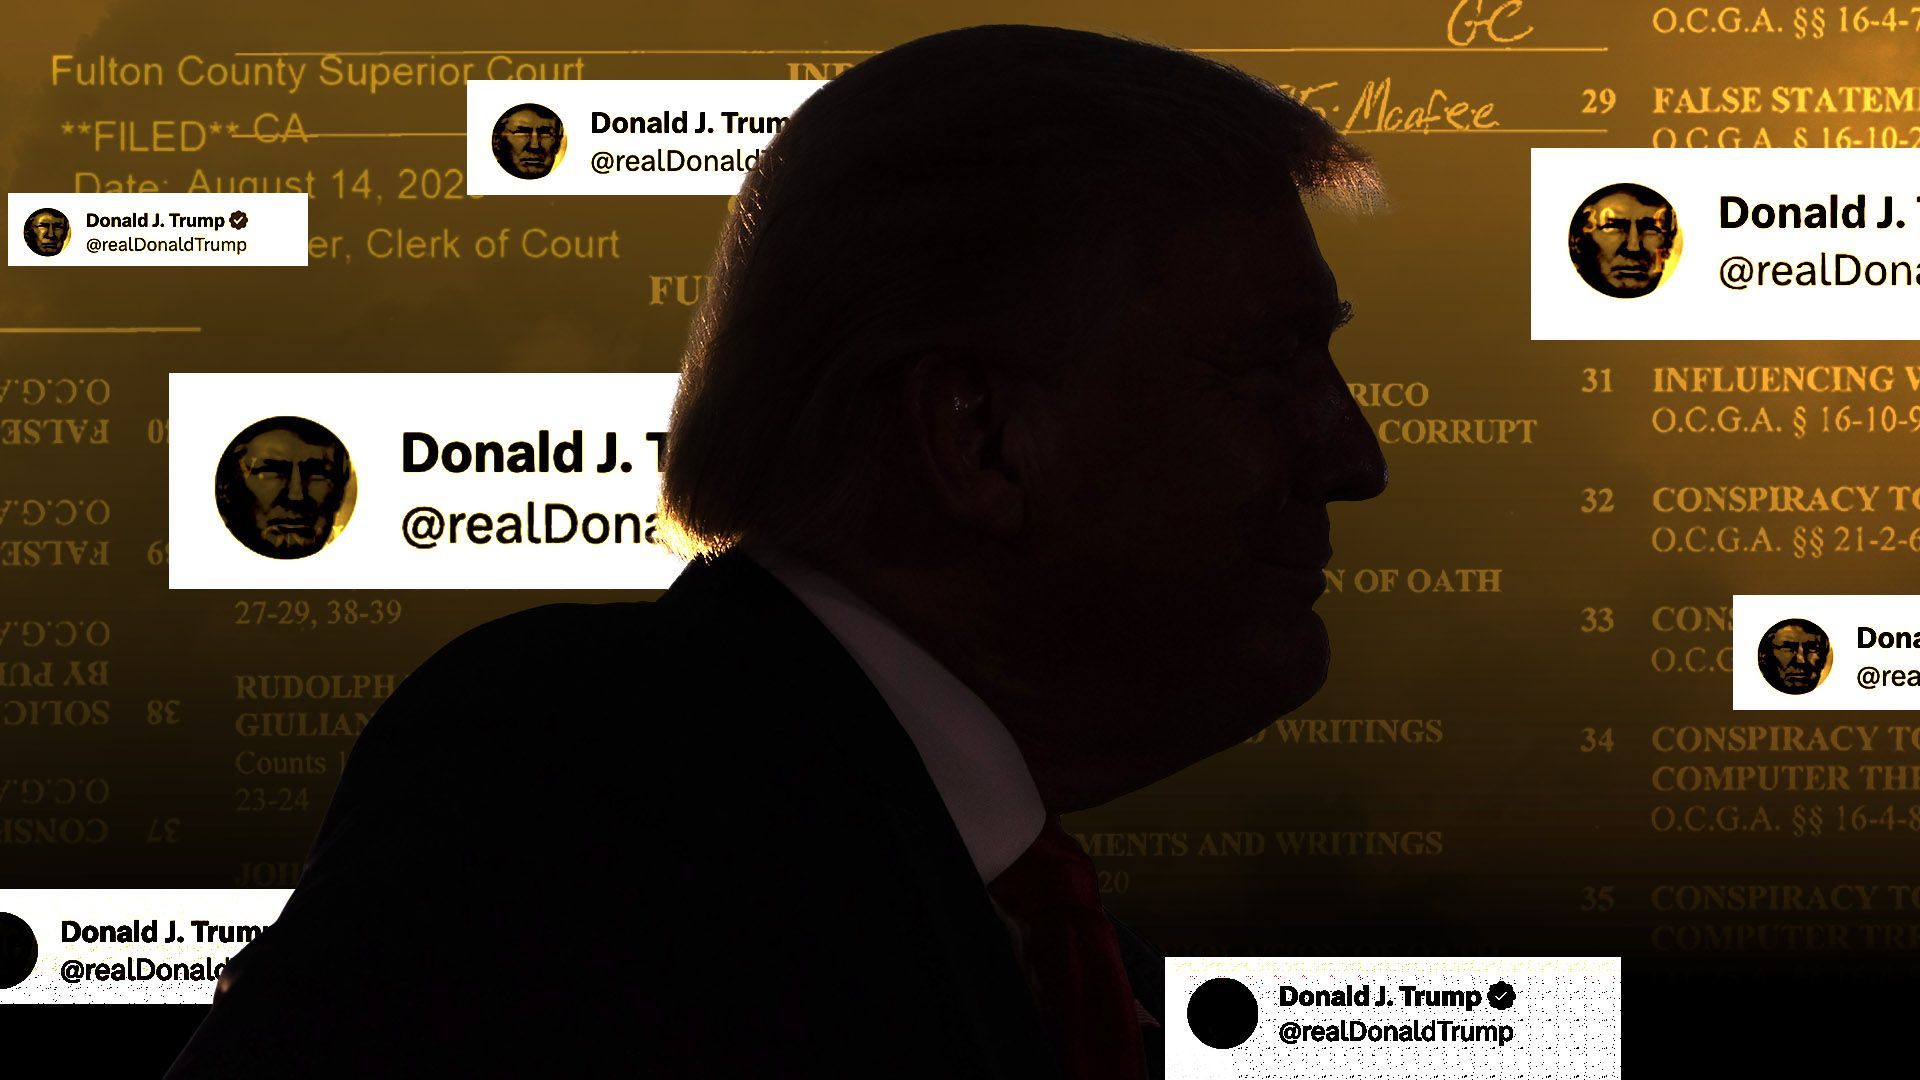 Photo Illustration of Donald Trump's silhouette surrounded by Twitter clips and court documents